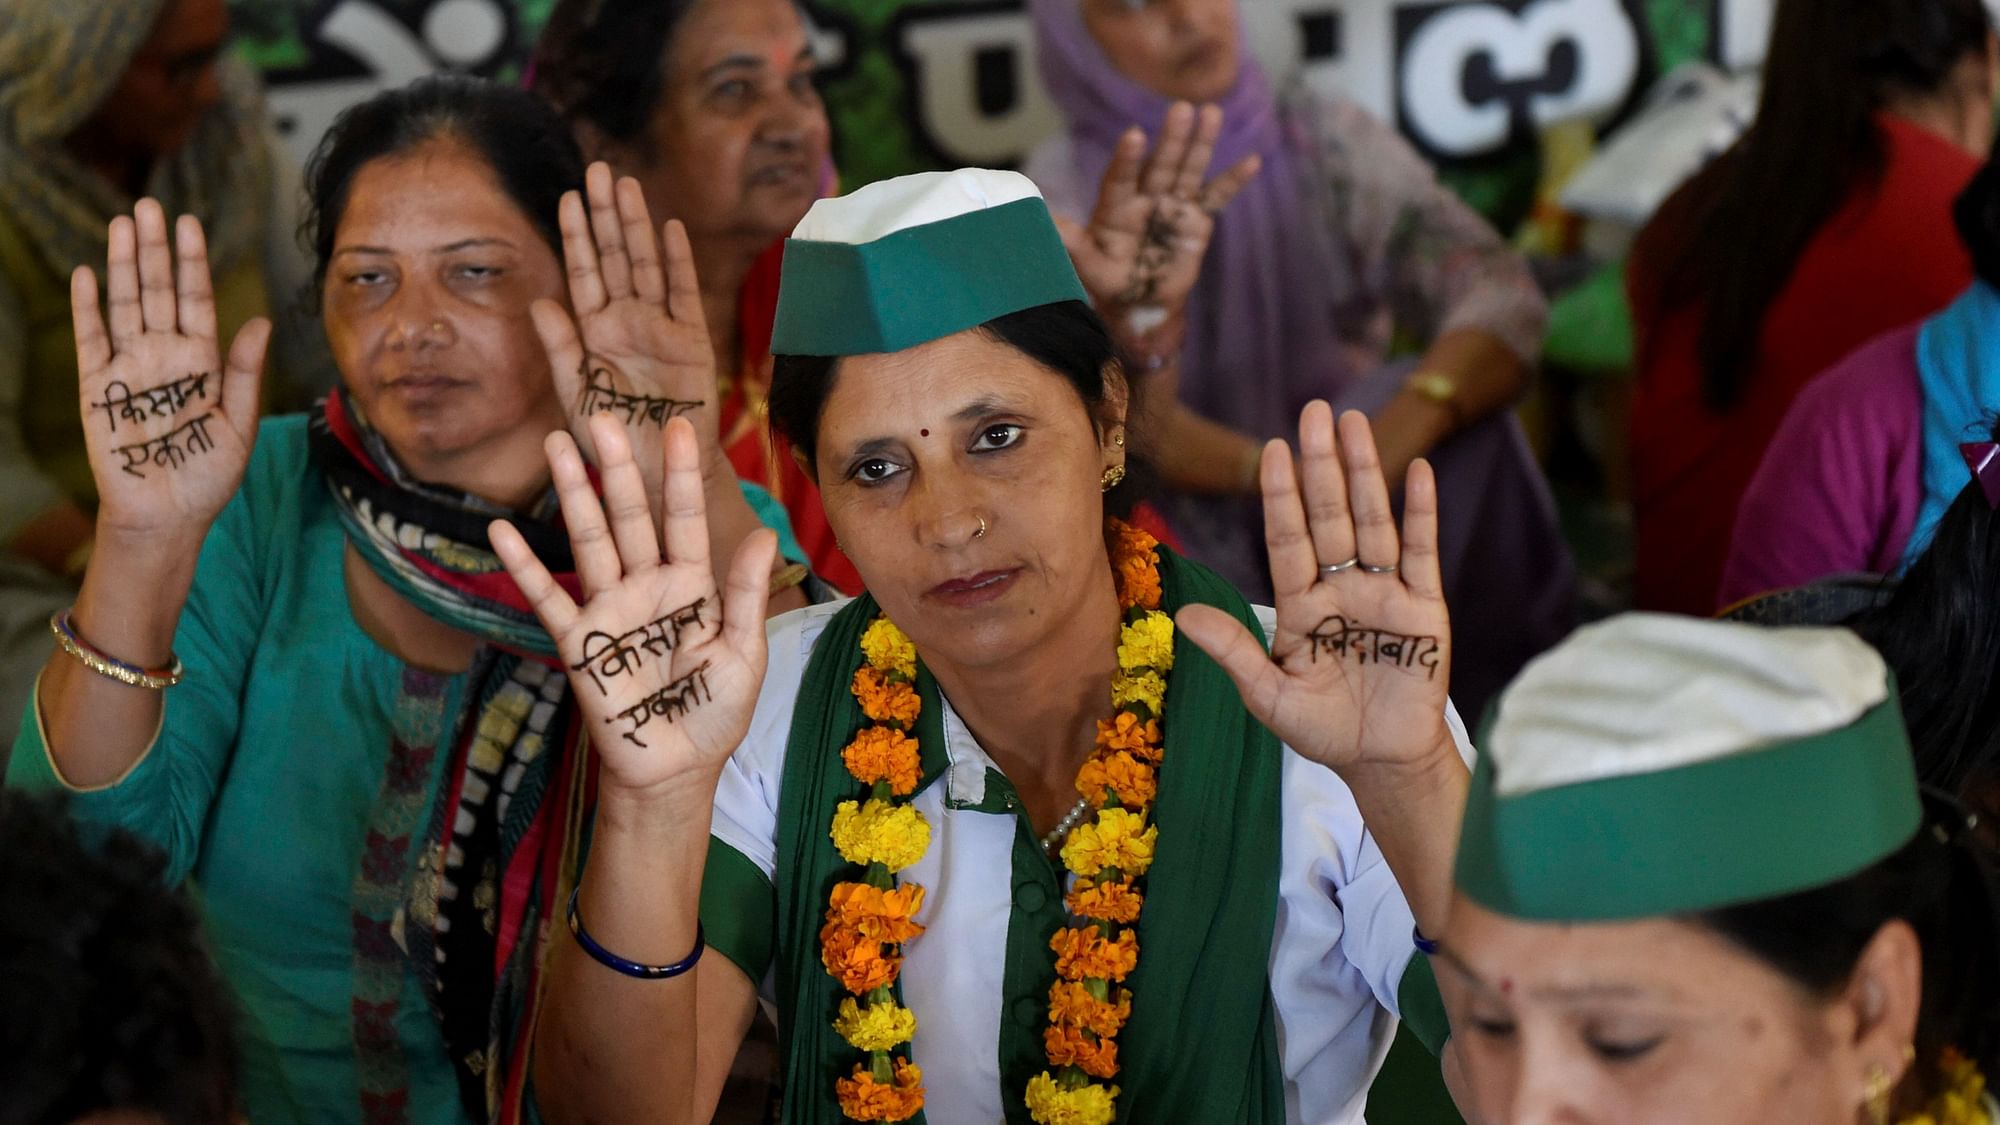 Women show their hands with Kisan Ekta written on them with Henna (Mehandi) to mark International Womens Day, during the farmers’ protest, at Ghazipur Border in New Delhi.